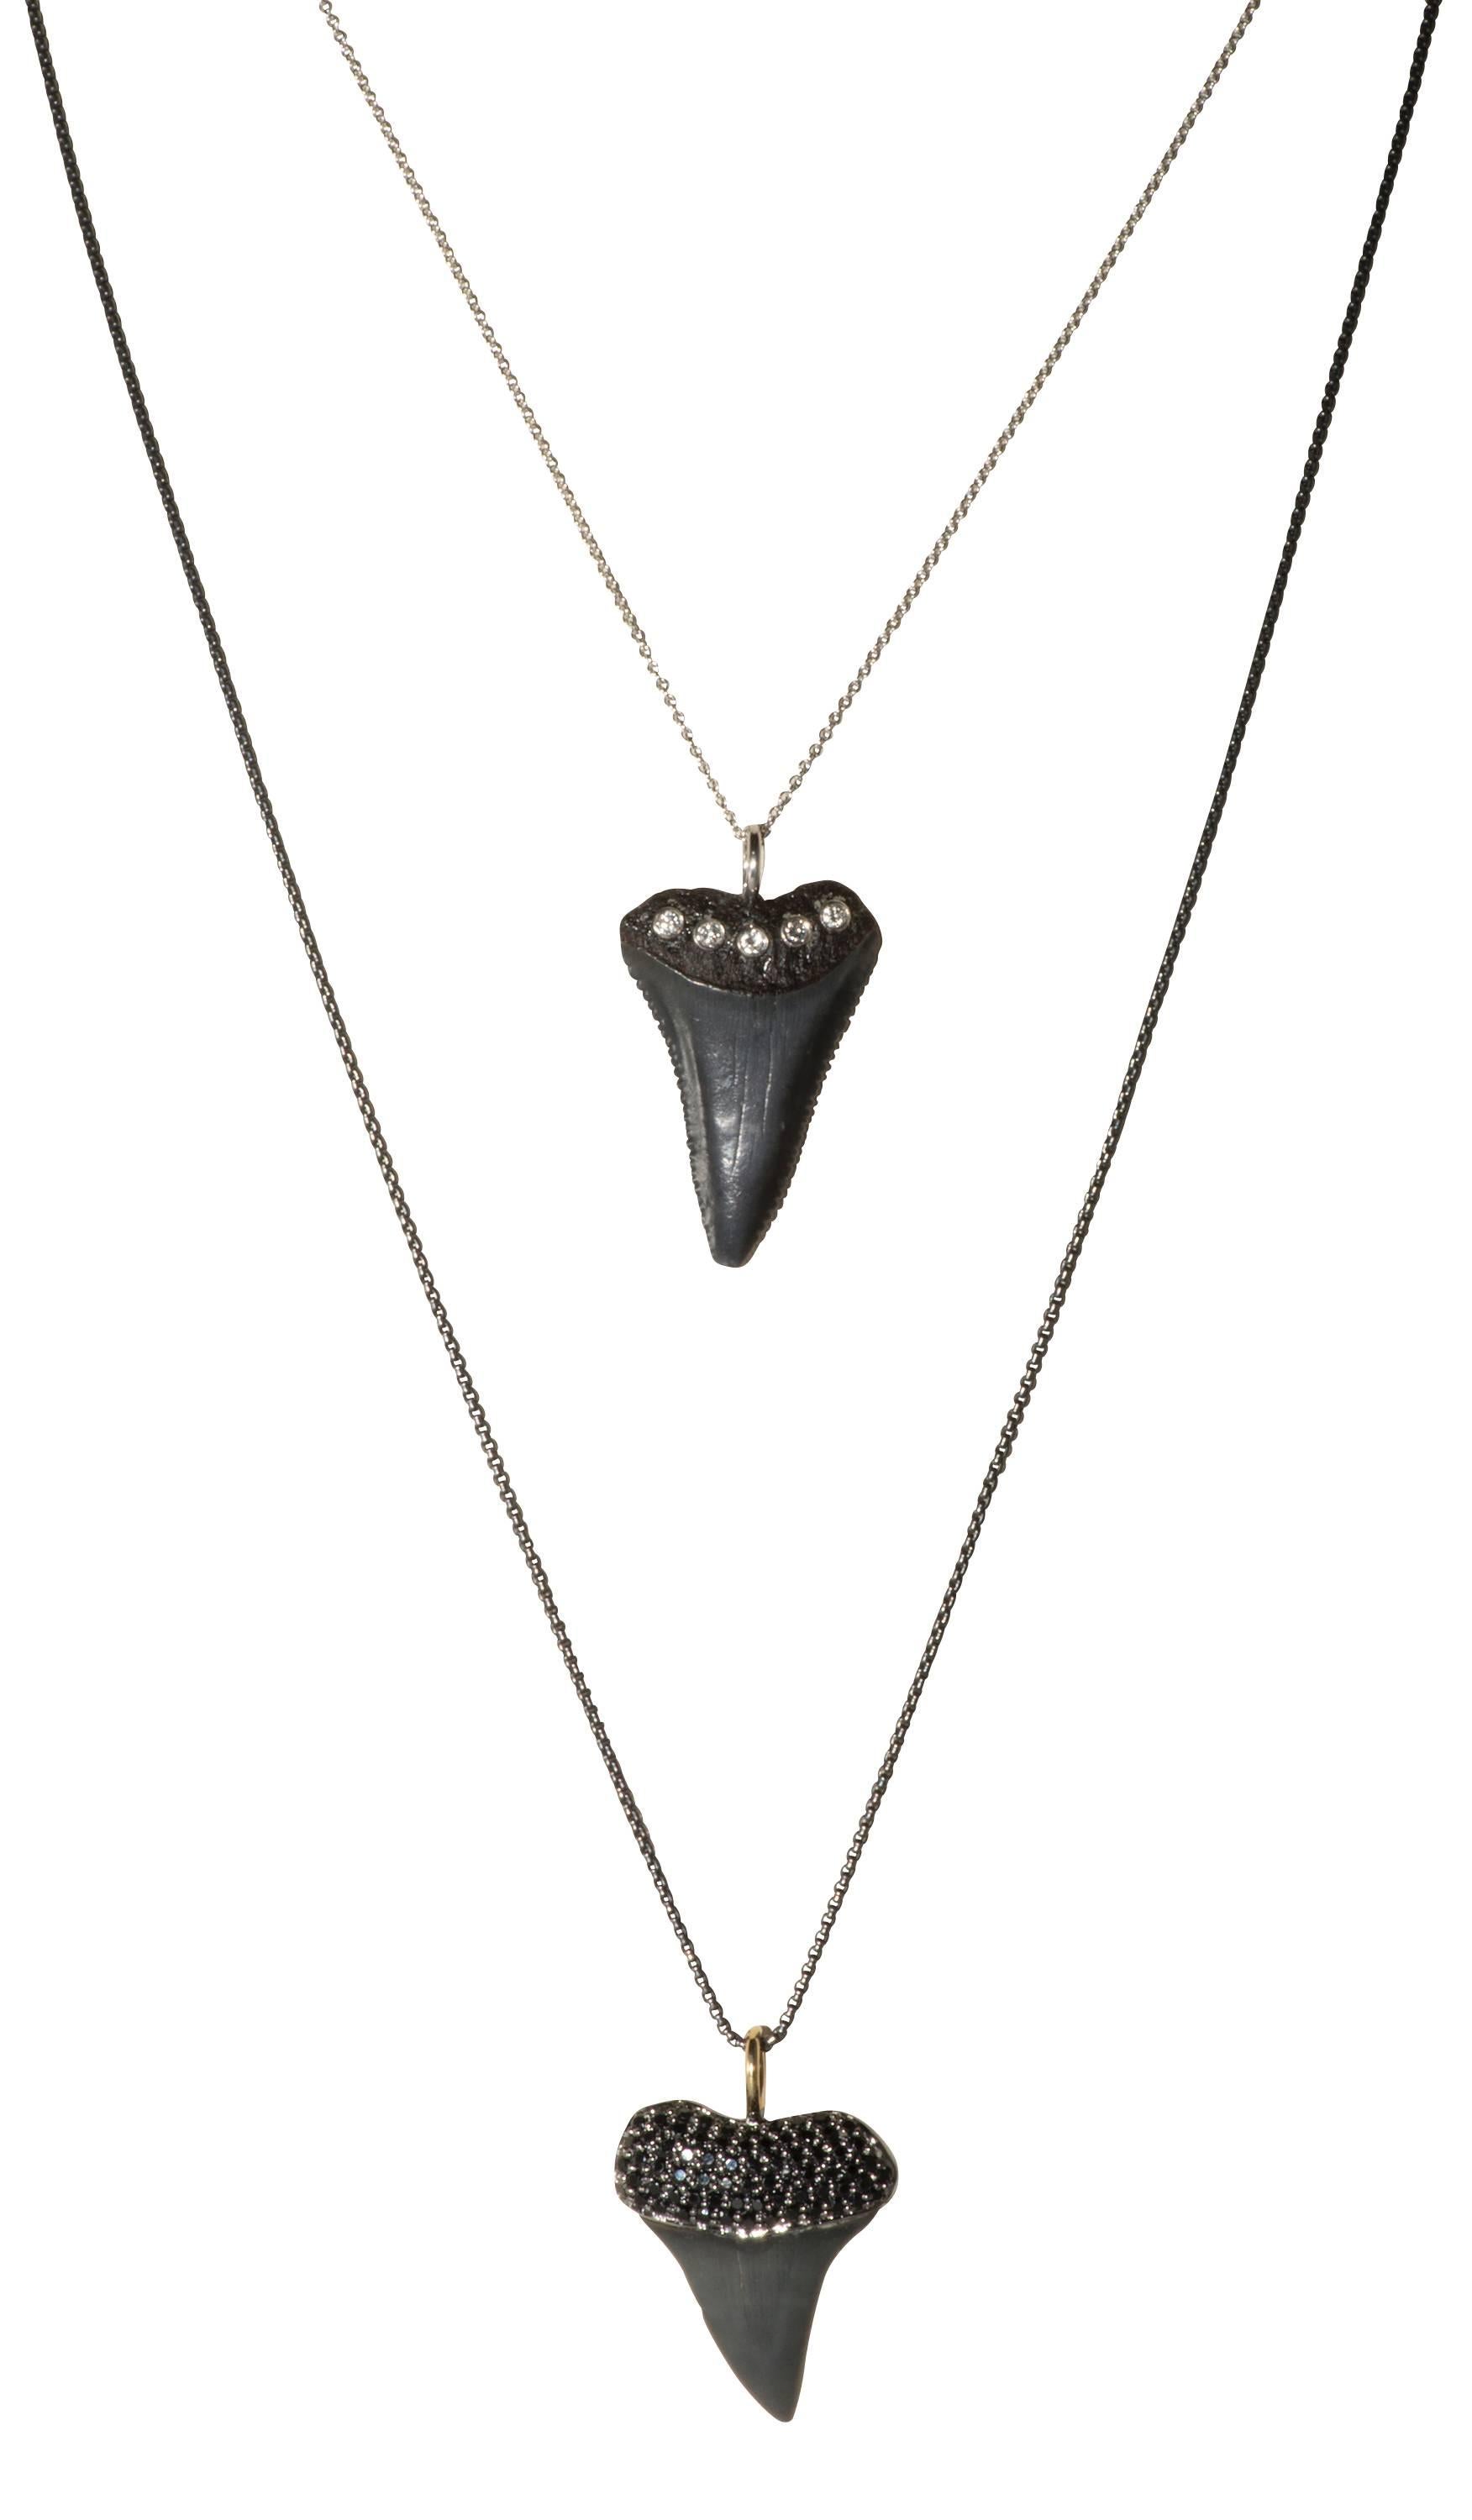 This is a pendant made from a  fossilized shark tooth with diamonds.